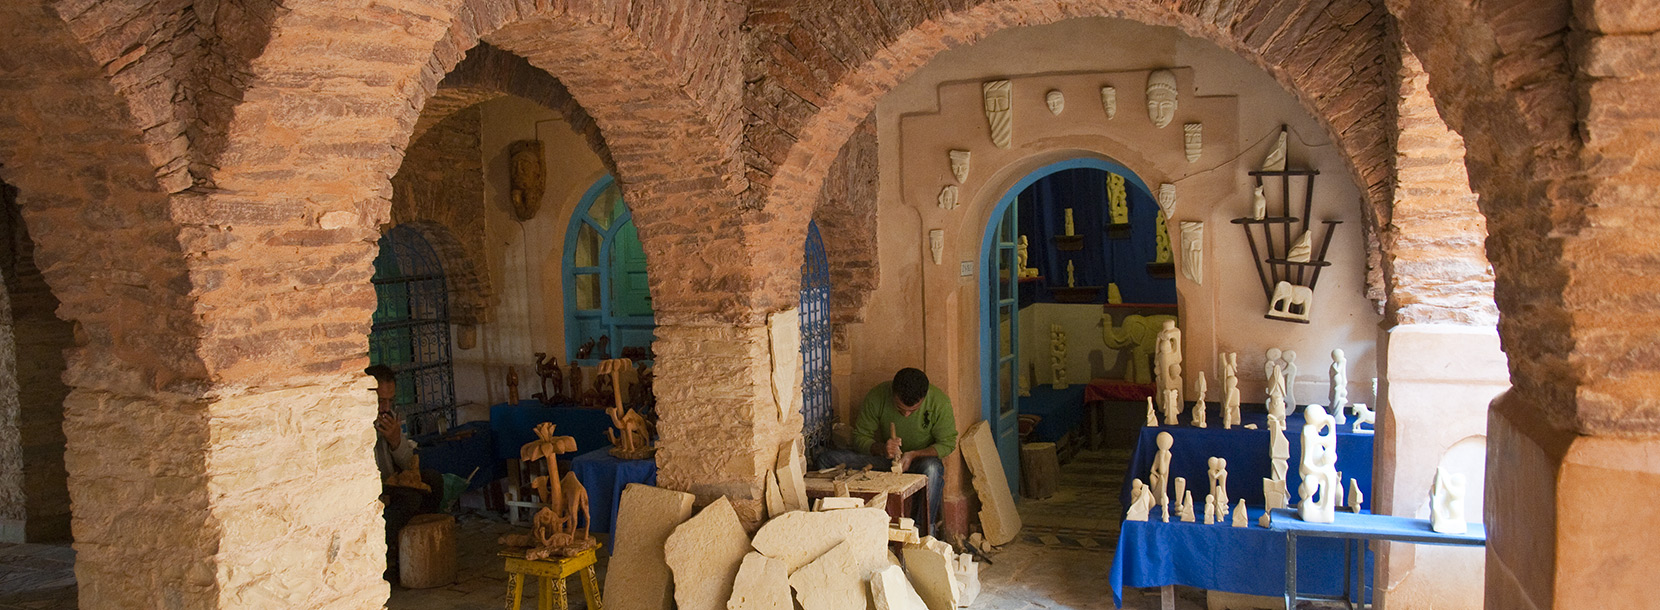 local produit and craft in the agadir the old city tourism in moroccot